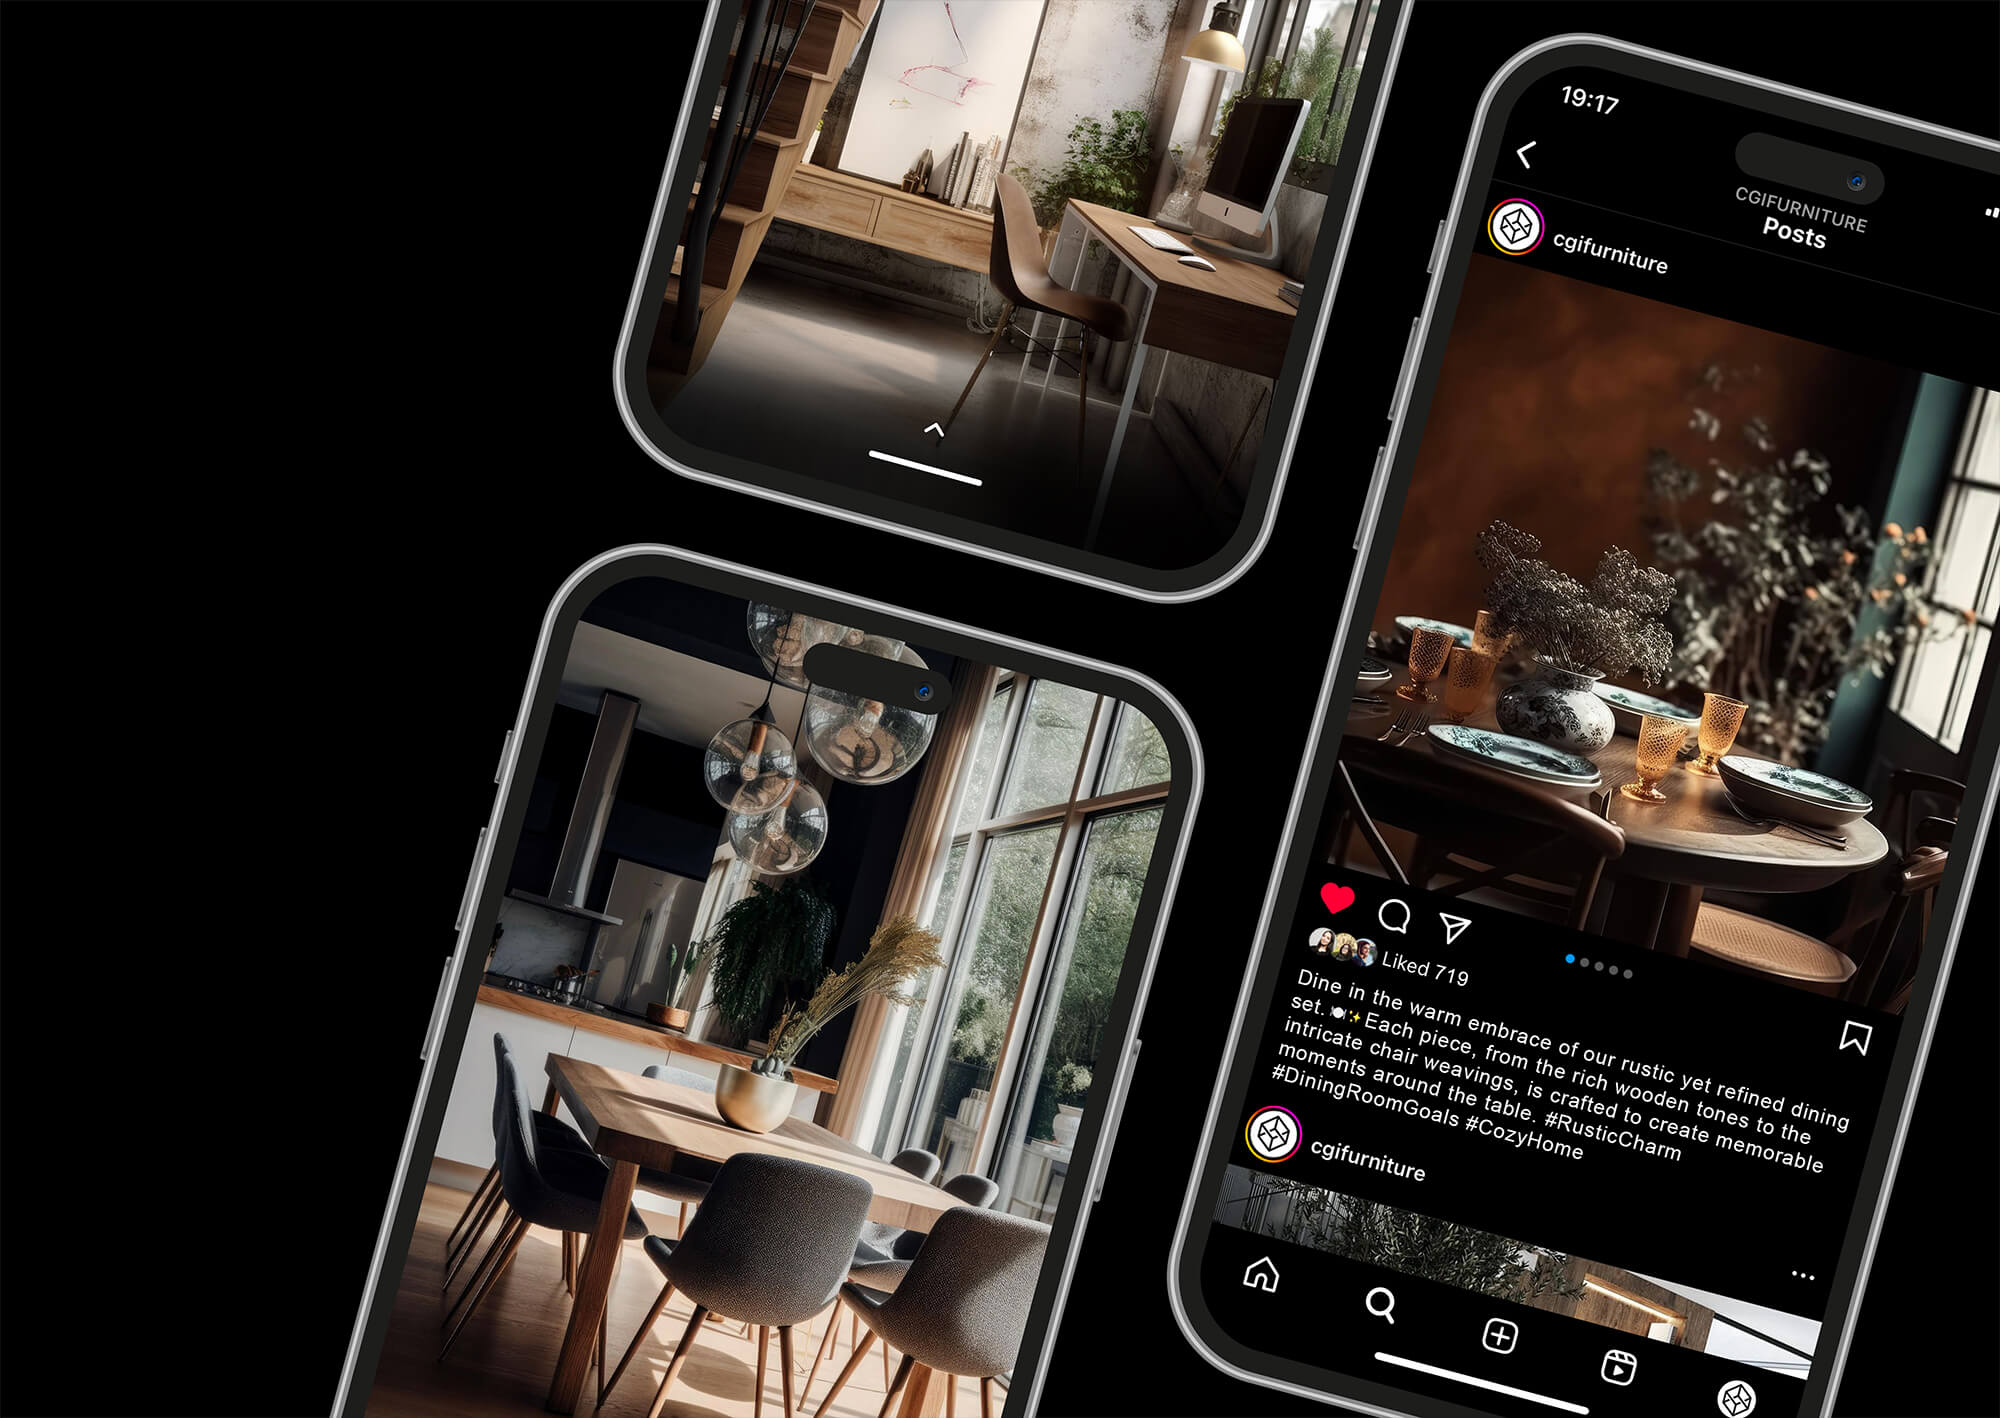 Mastering 3D Modelling presented in a smartphone showcasing interior design posts